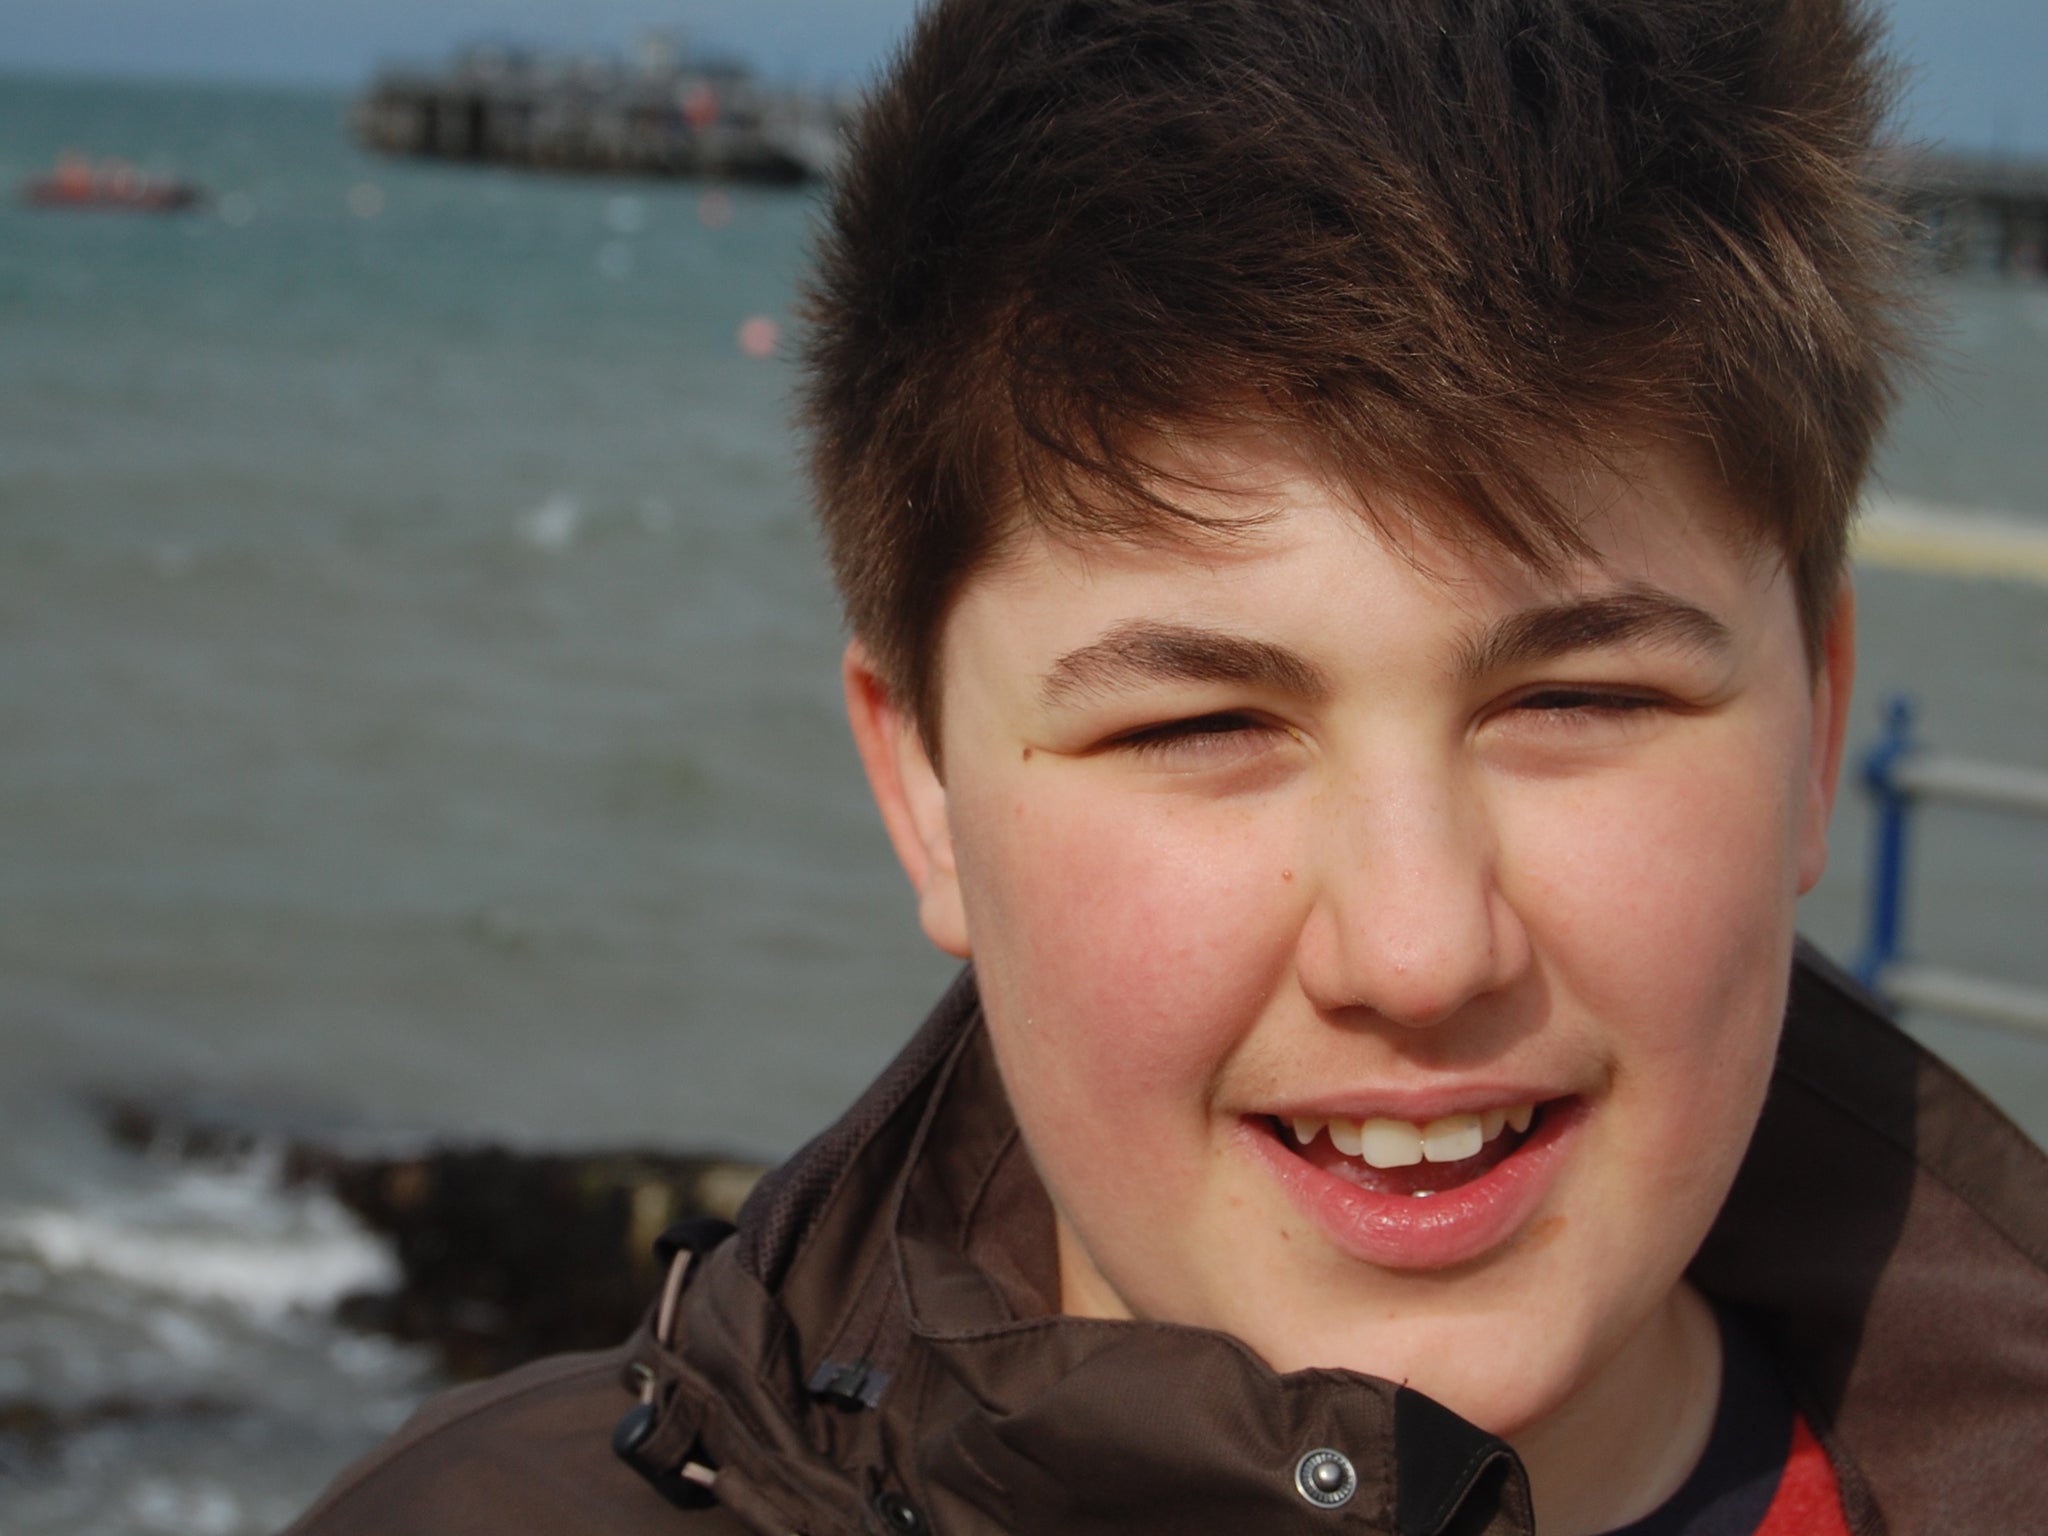 Matthew Garnett, 15, has autism, learning difficulties and ADHD